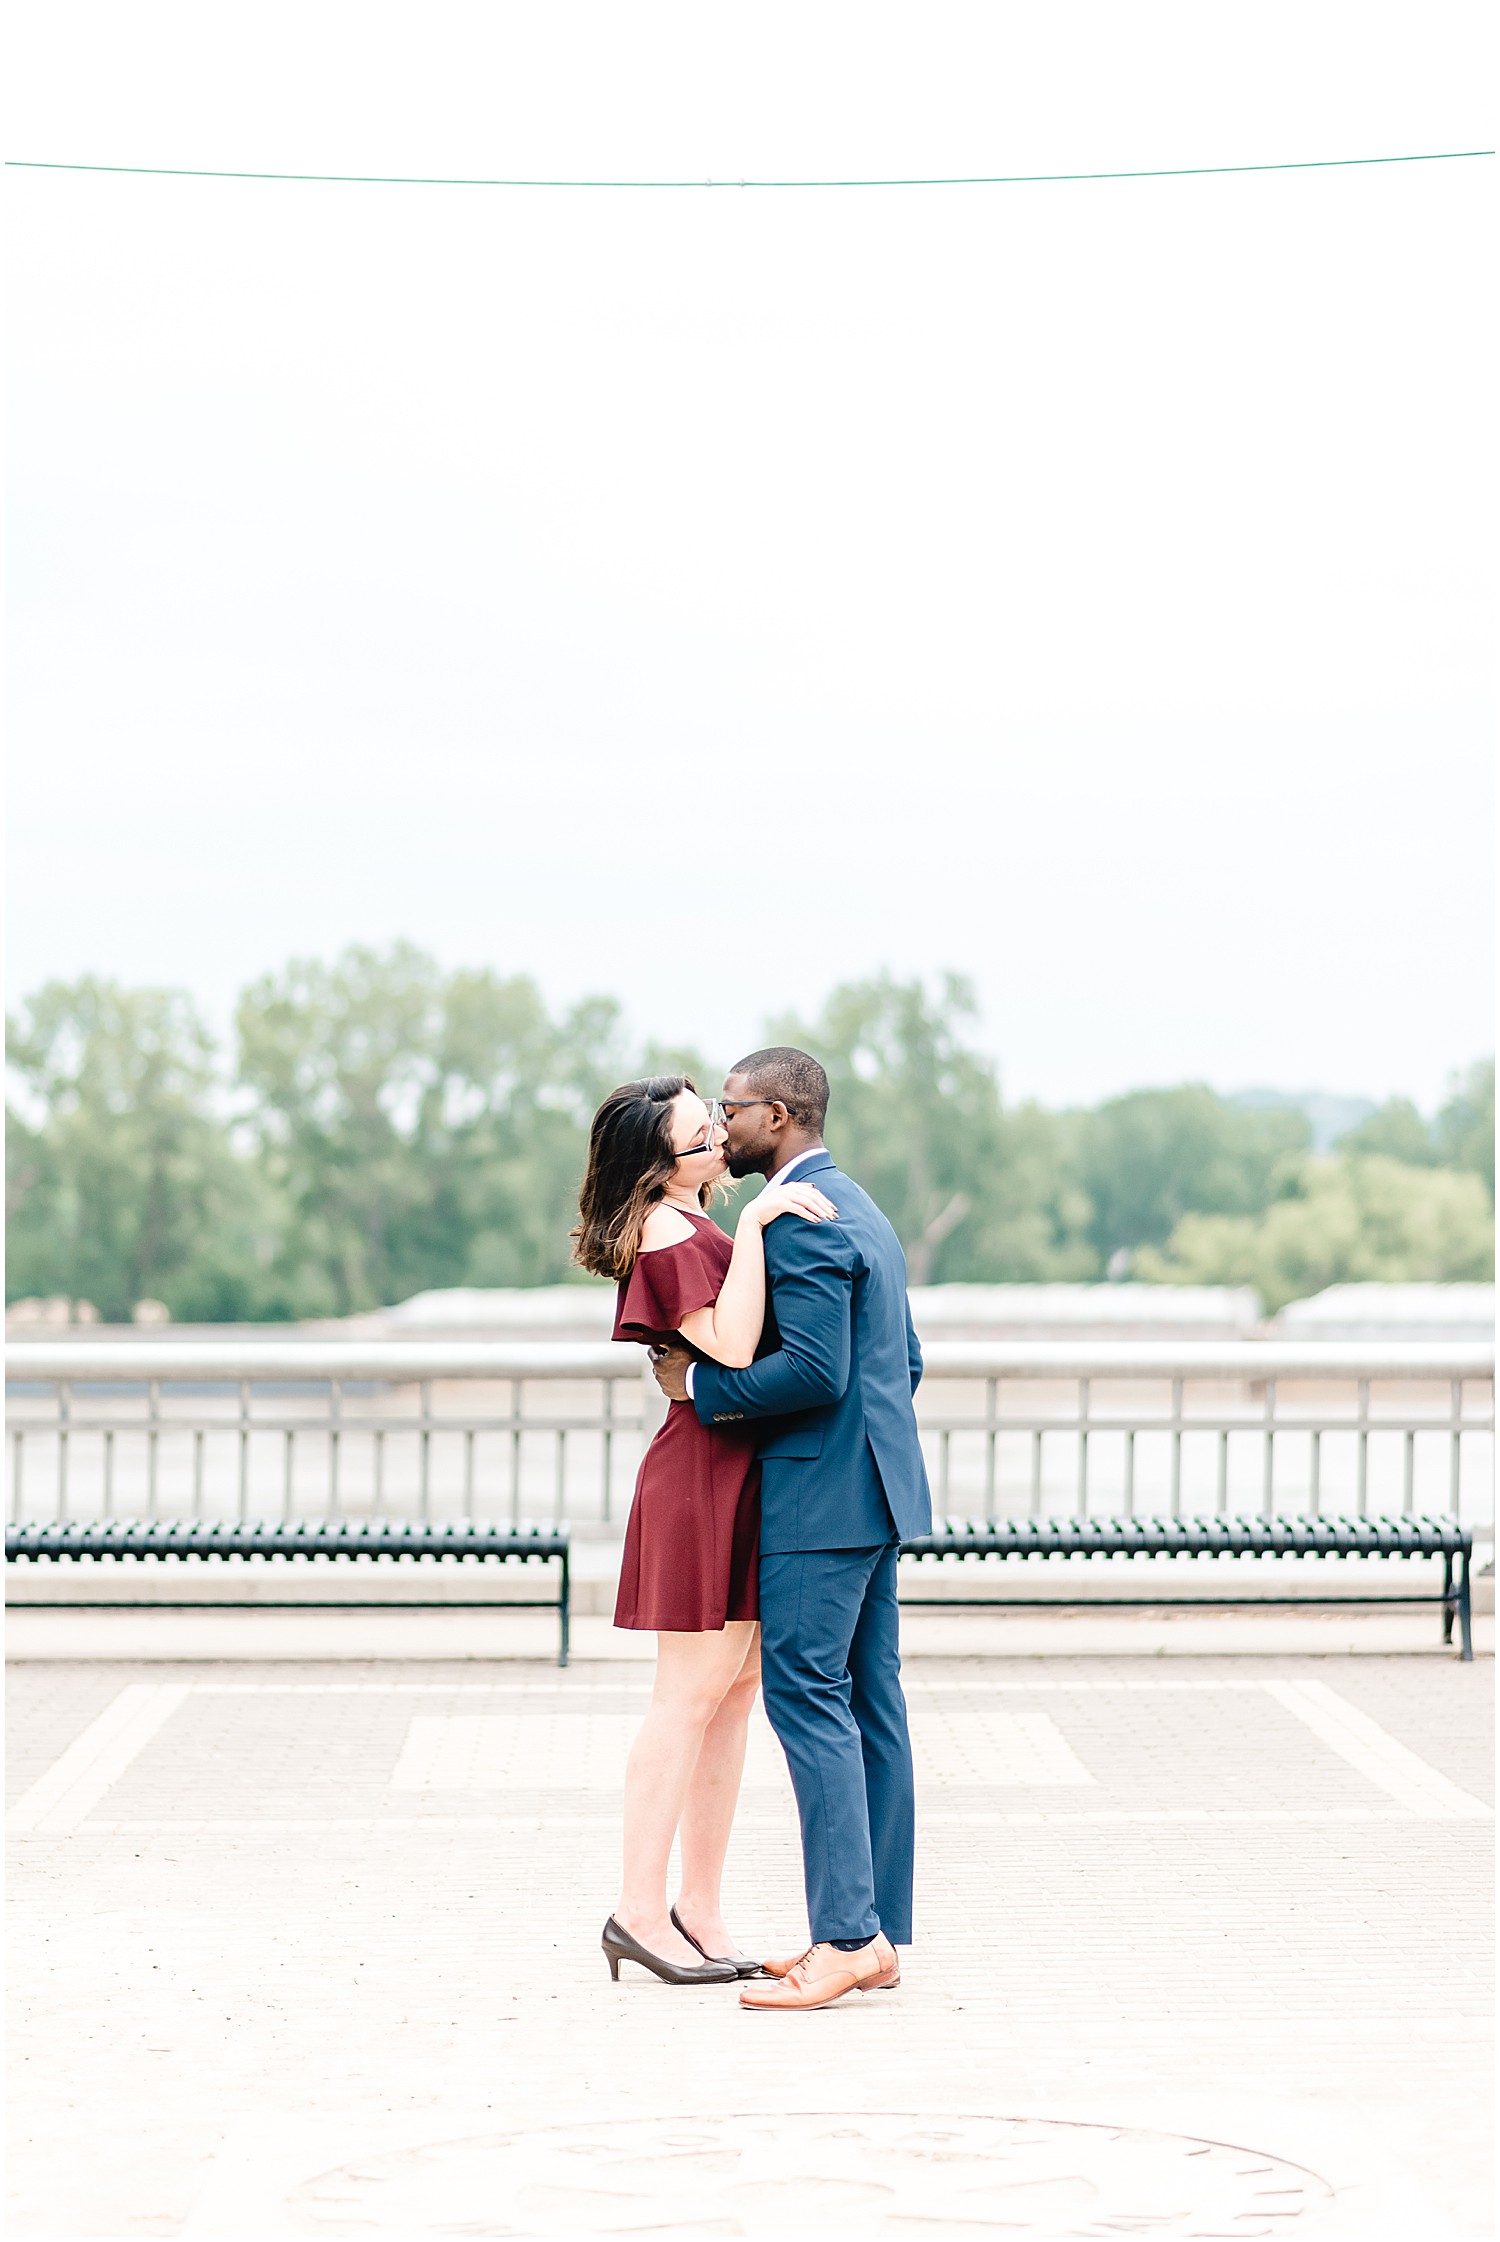 Downtown jefferson city river overlook engagement session couple dancing in parking lot